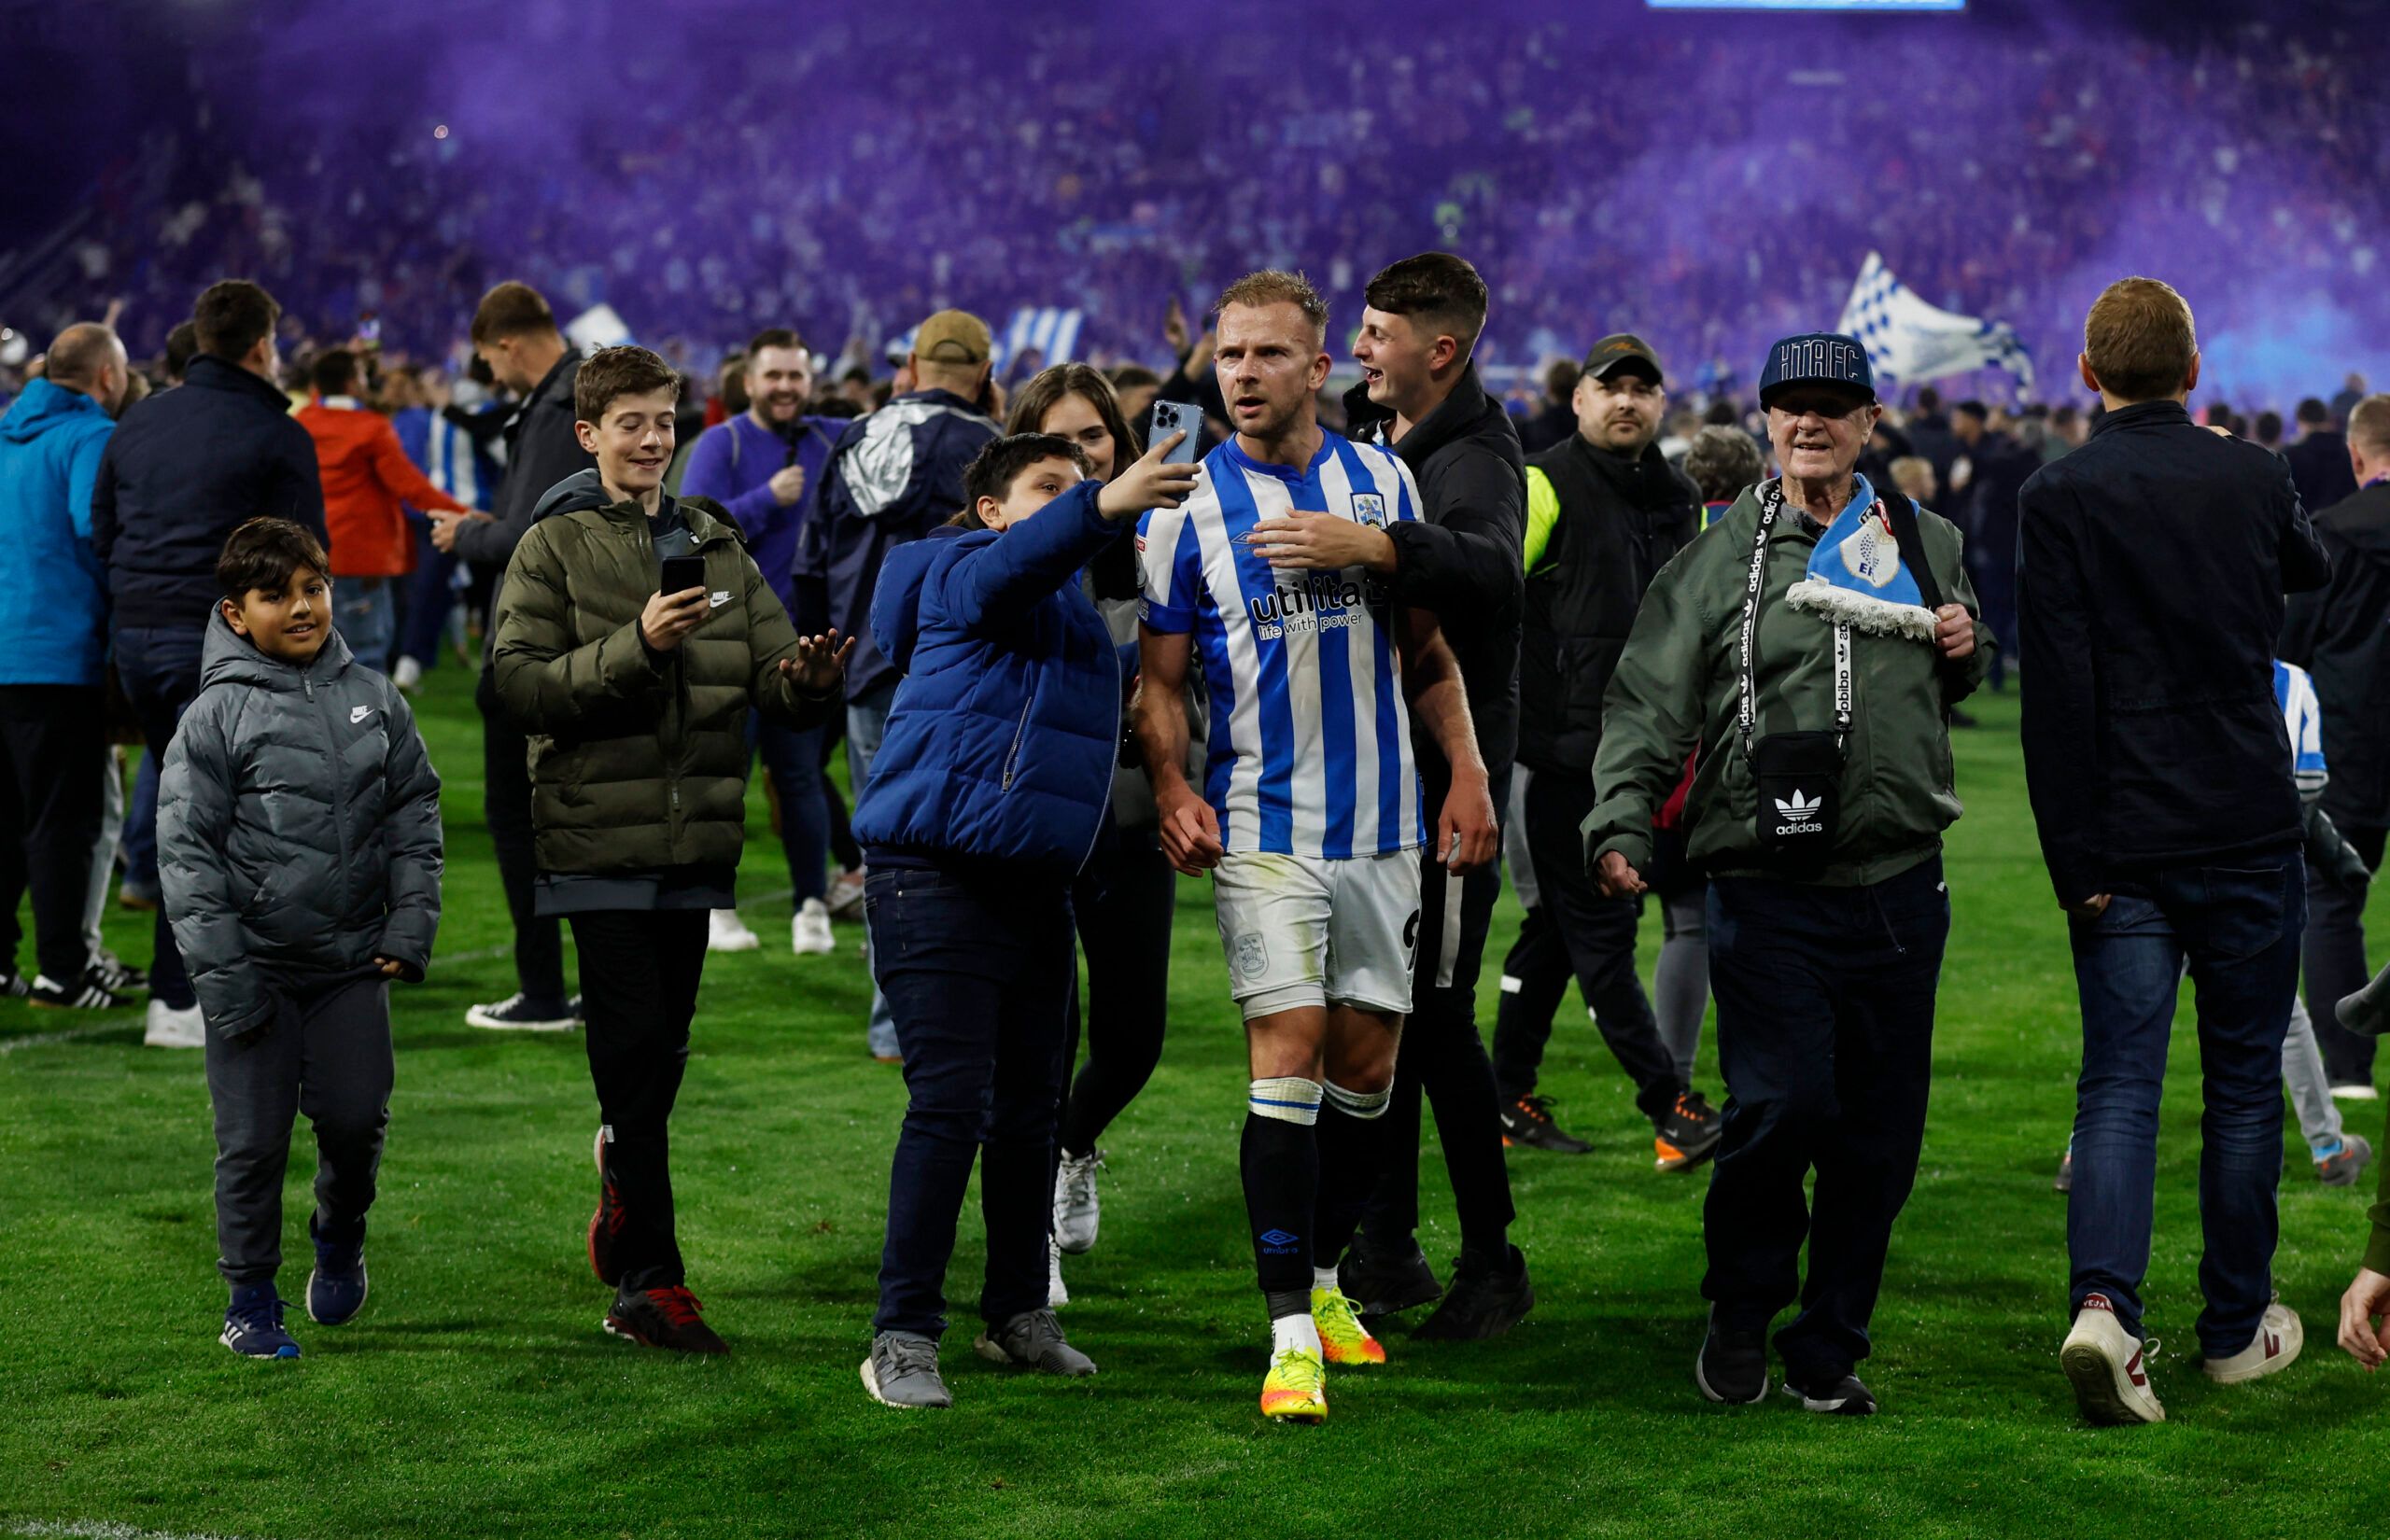 Soccer Football - Championship - Play-Offs Second Leg - Huddersfield Town v Luton Town - John Smith's Stadium, Huddersfield, Britain - May 16, 2022 Huddersfield Town's Jordan Rhodes celebrates with fans after reaching the Championship Play-Off Final Action Images via Reuters/Jason Cairnduff